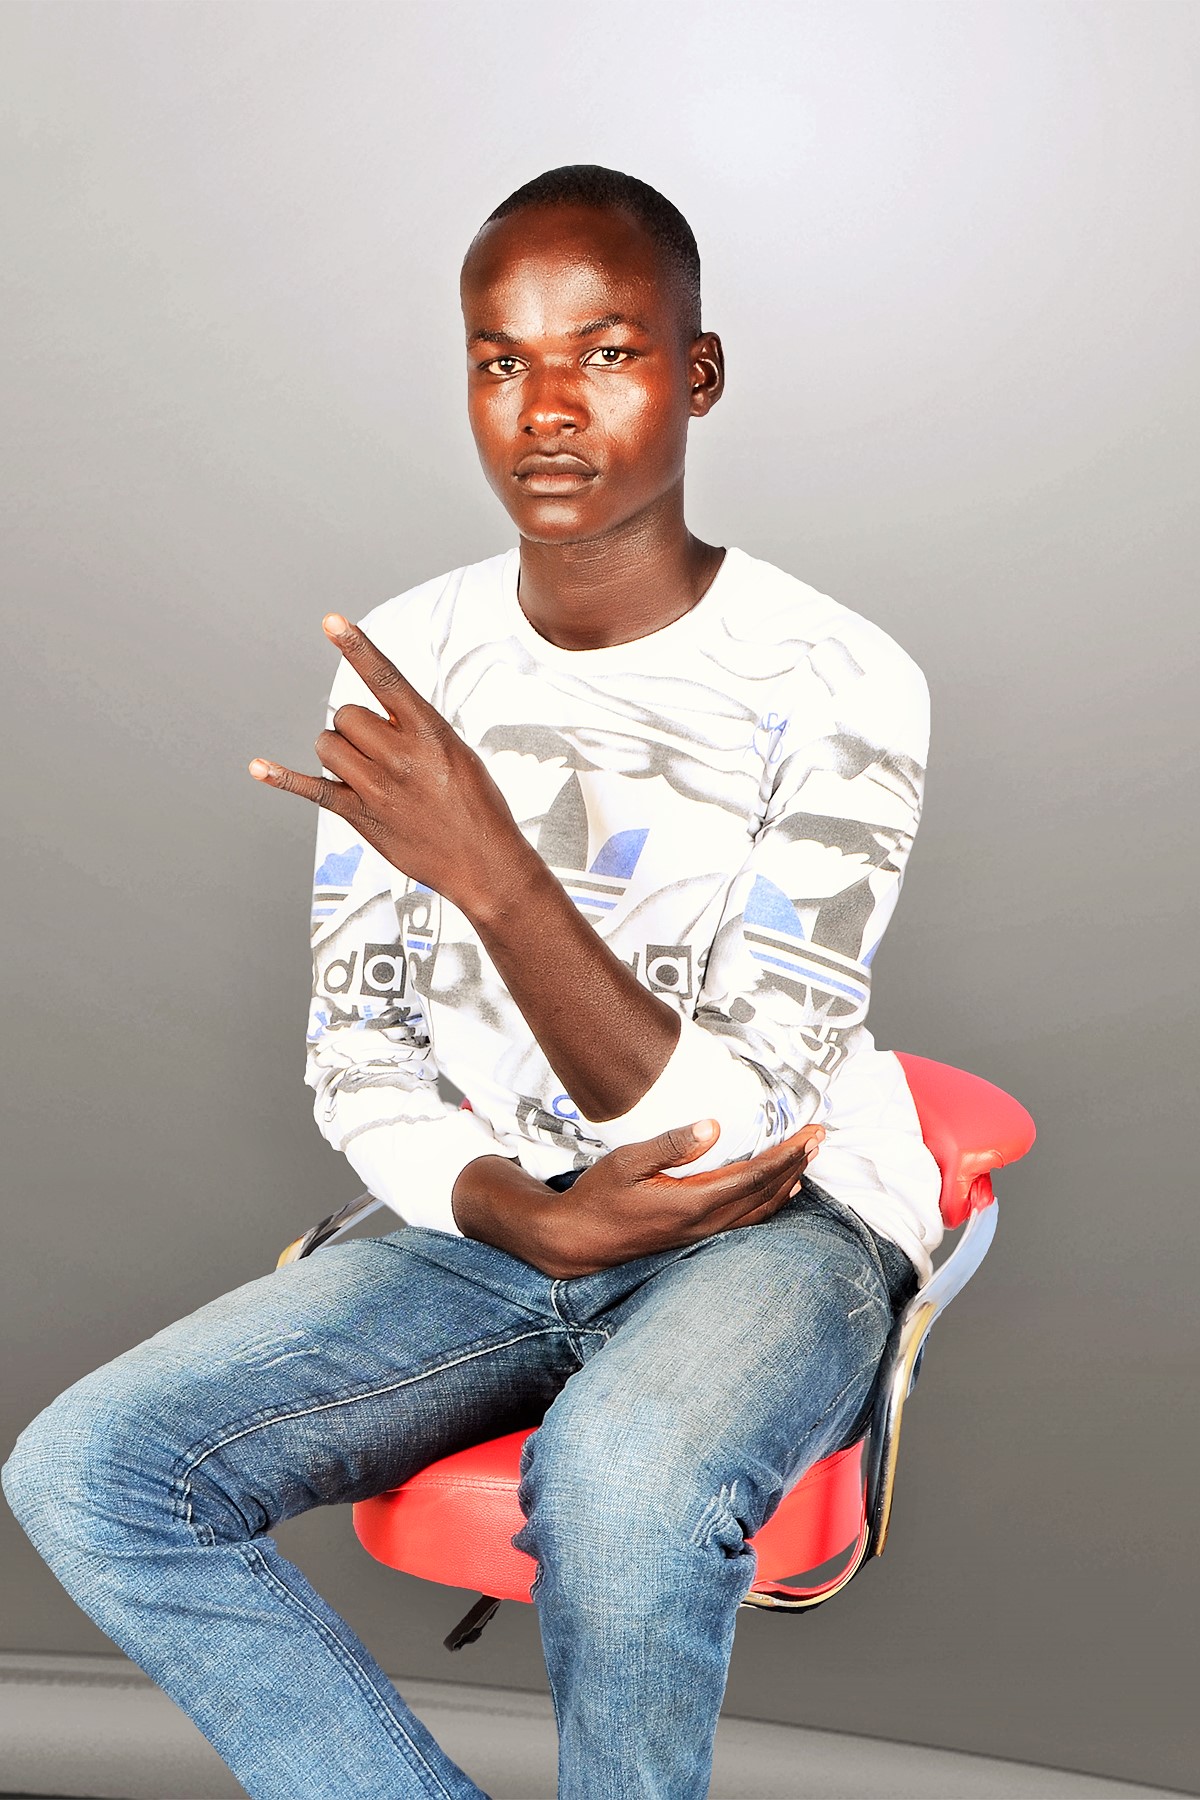 Jordan Tray (Swagg Boy) | Free Music, Mp3, Song Downloads, Video and Biography - LuoTunes.Com
                        